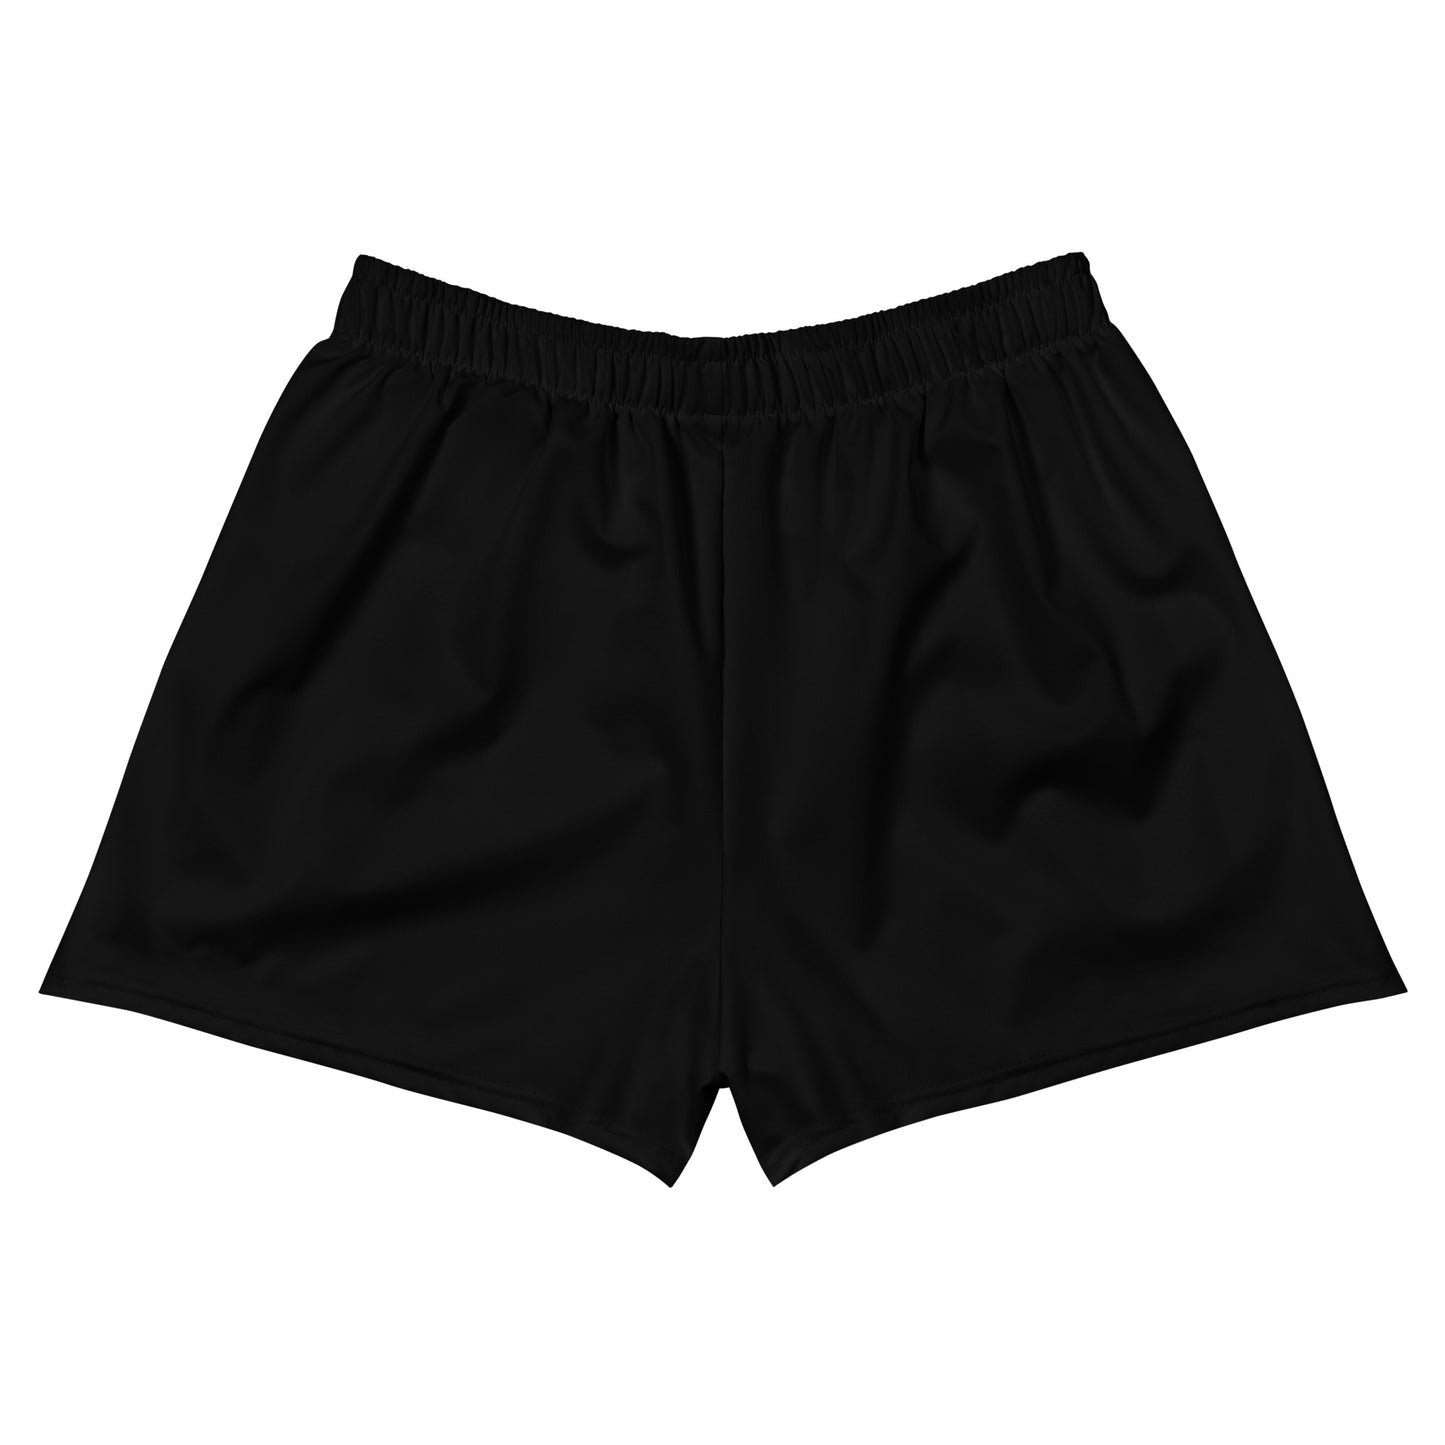 Signature Savage Mike Women’s Athletic Shorts